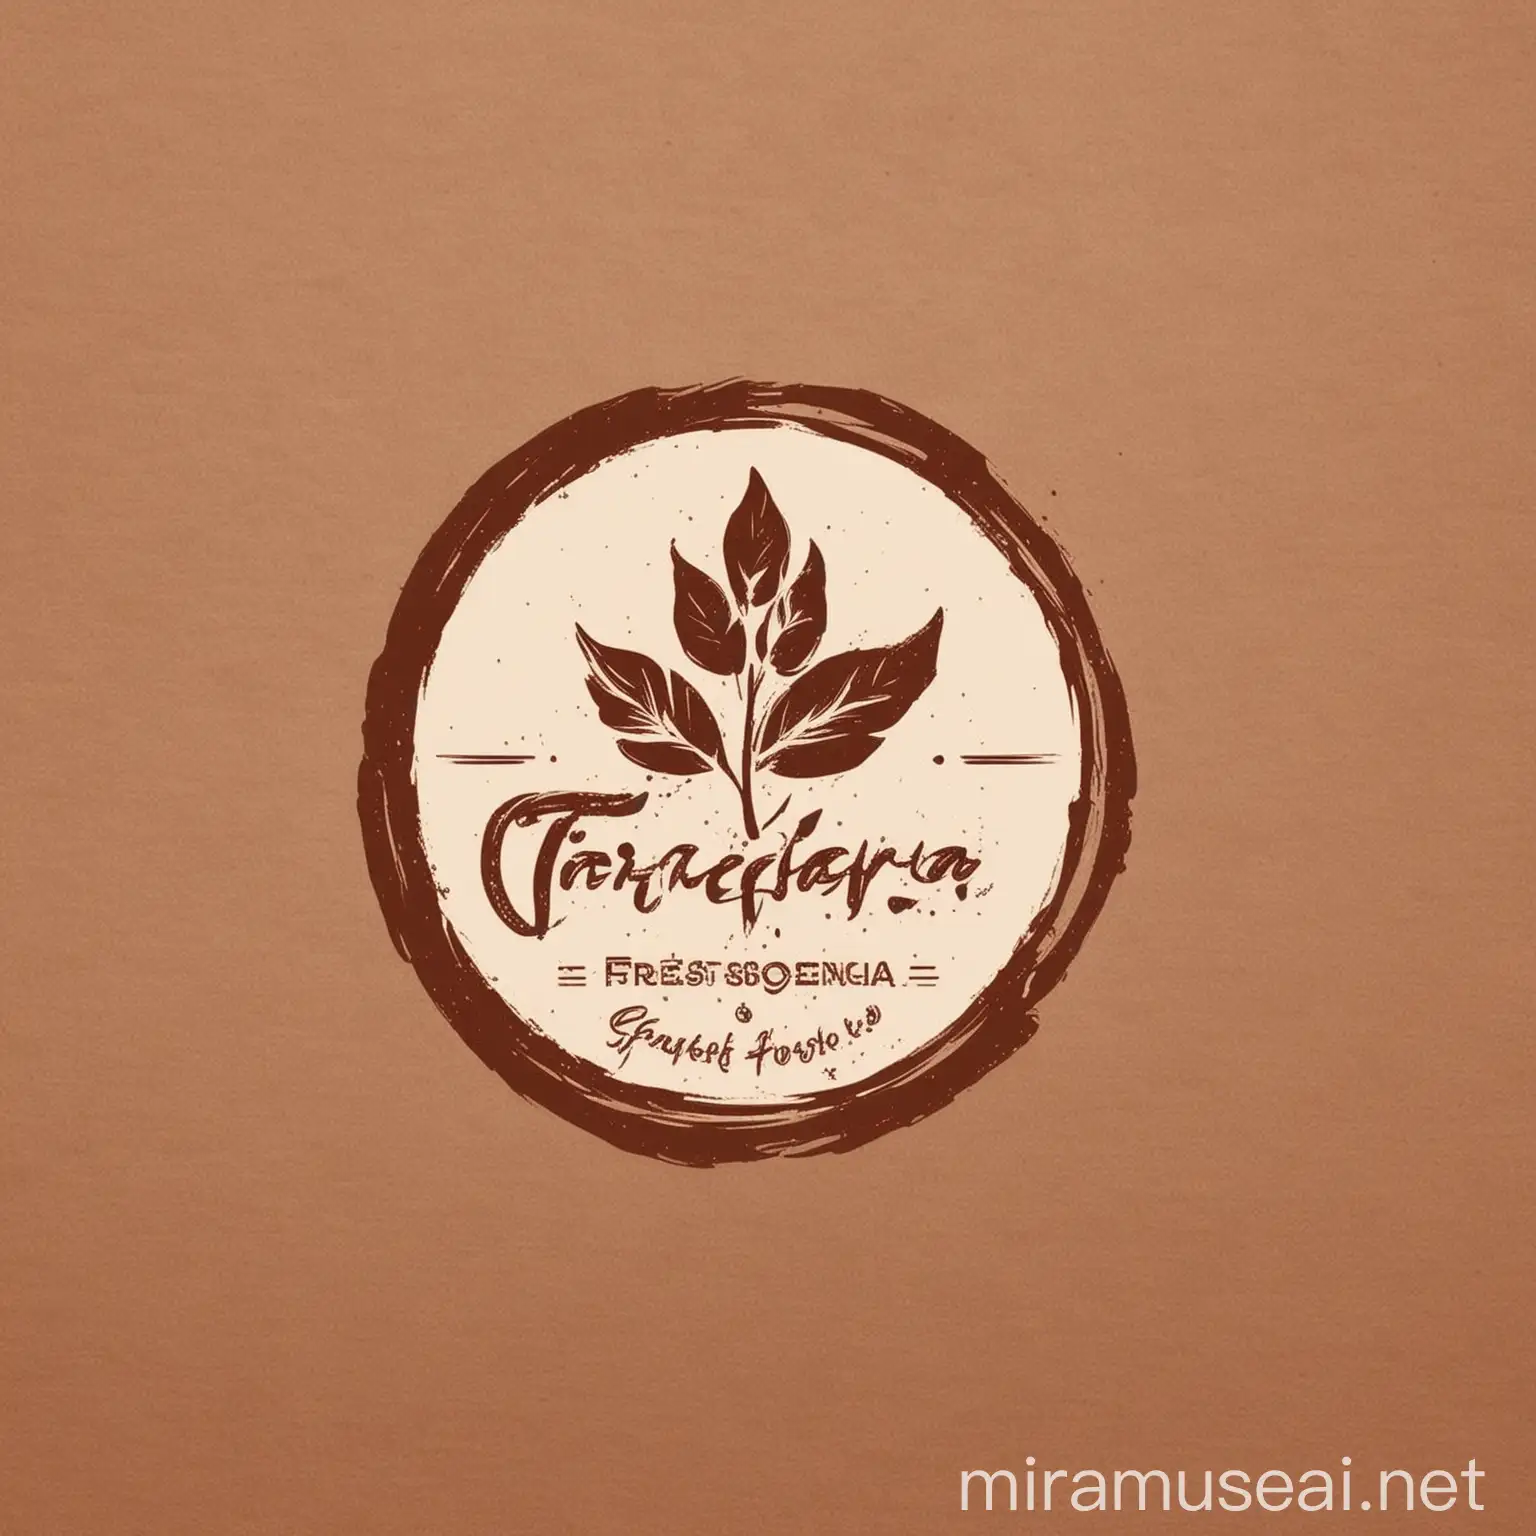 Design a logo for "TORREFACTORA LAS 3 GRACIAS", a coffee and cocoa roaster. The logo should incorporate a coffee branch with three leaves as the main element. Use a brown color scheme that combines with another contrasting color to highlight the name. The design should be modern, minimalist, and suitable for use in point-of-sale materials. Highlight the full name of the company in the design for clear identification. The goal is to create a striking logo that competes in the market and captures consumers' attention.